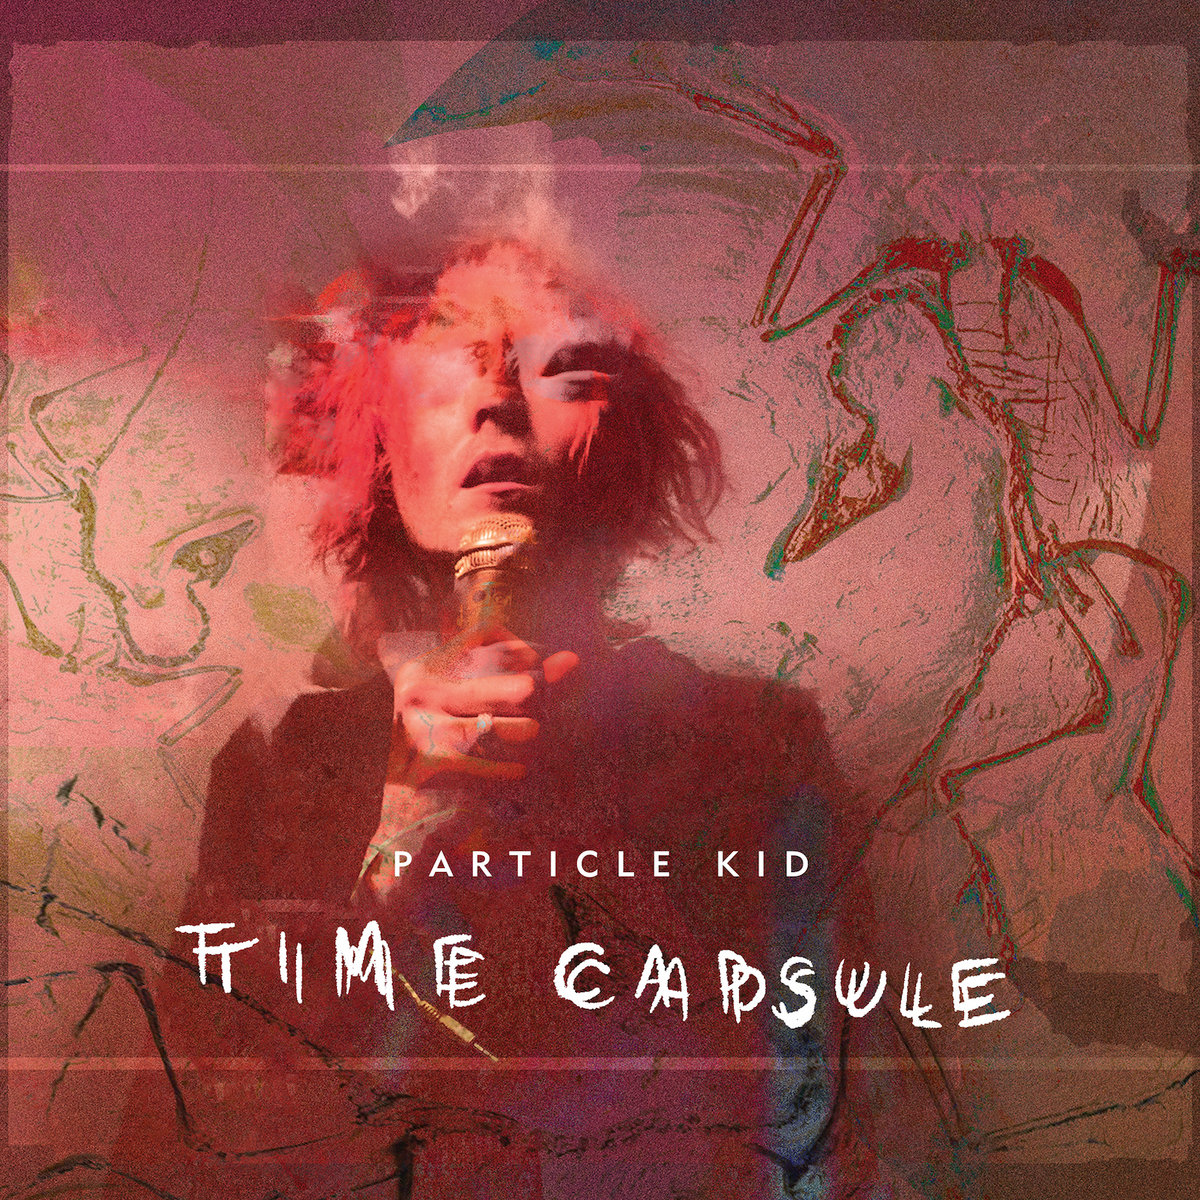 Artwork for Time Capsule by Particle Kid